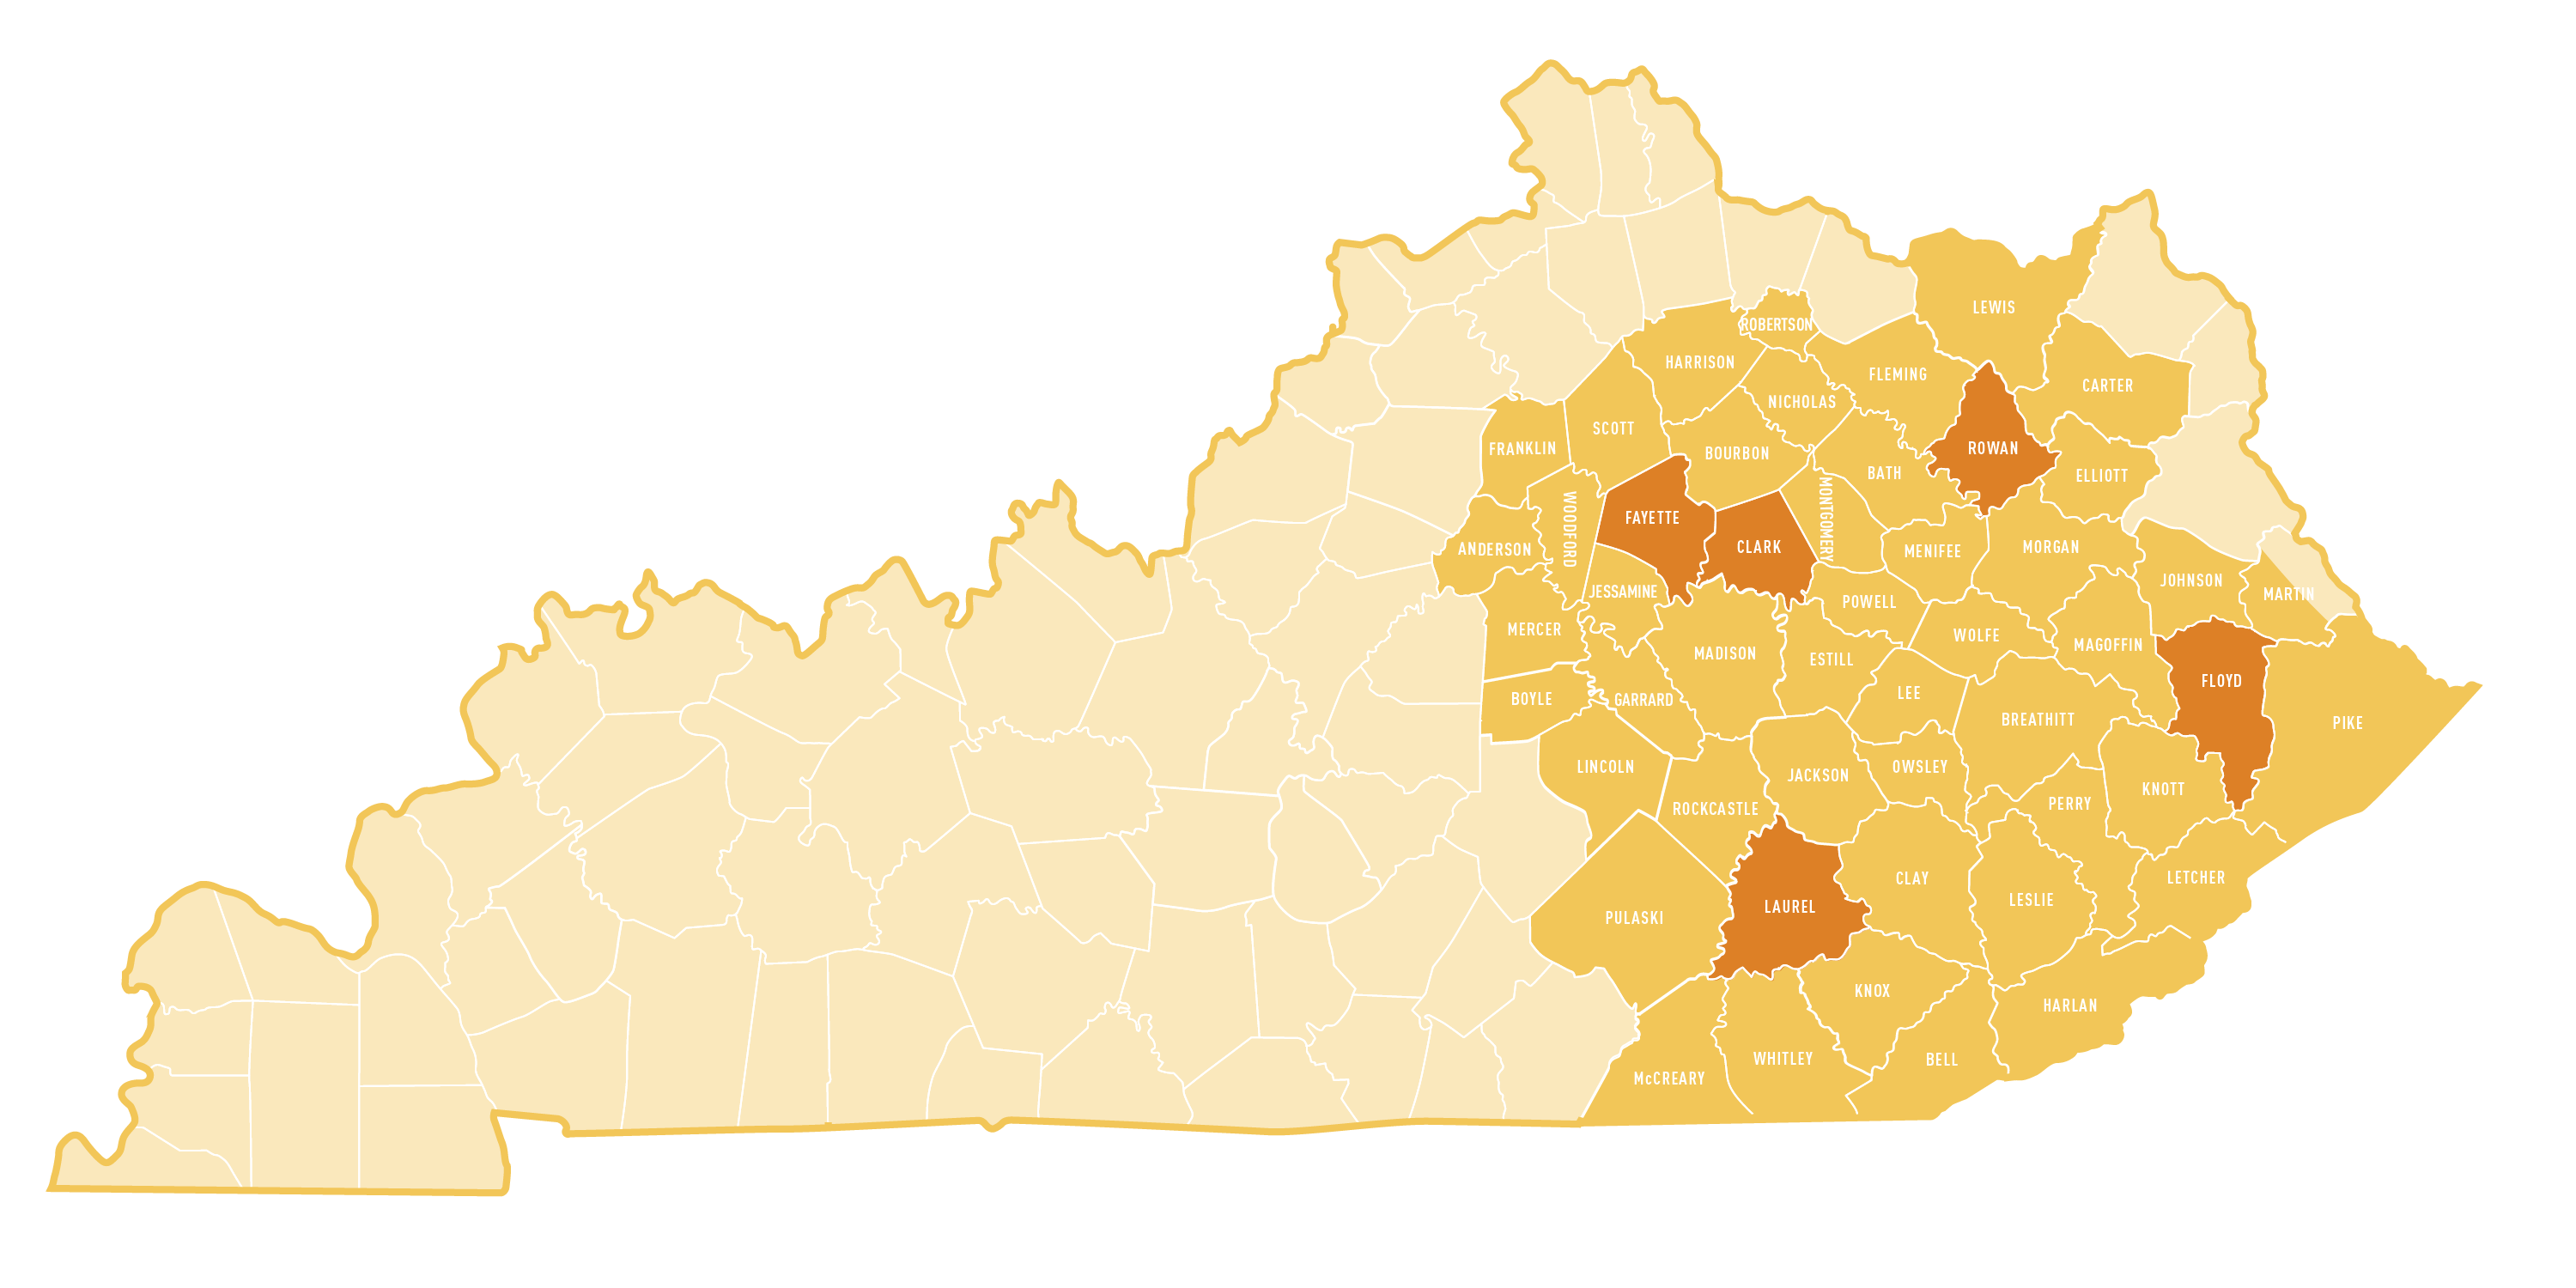 God's Pantry Food Bank coverage area in Kentucky